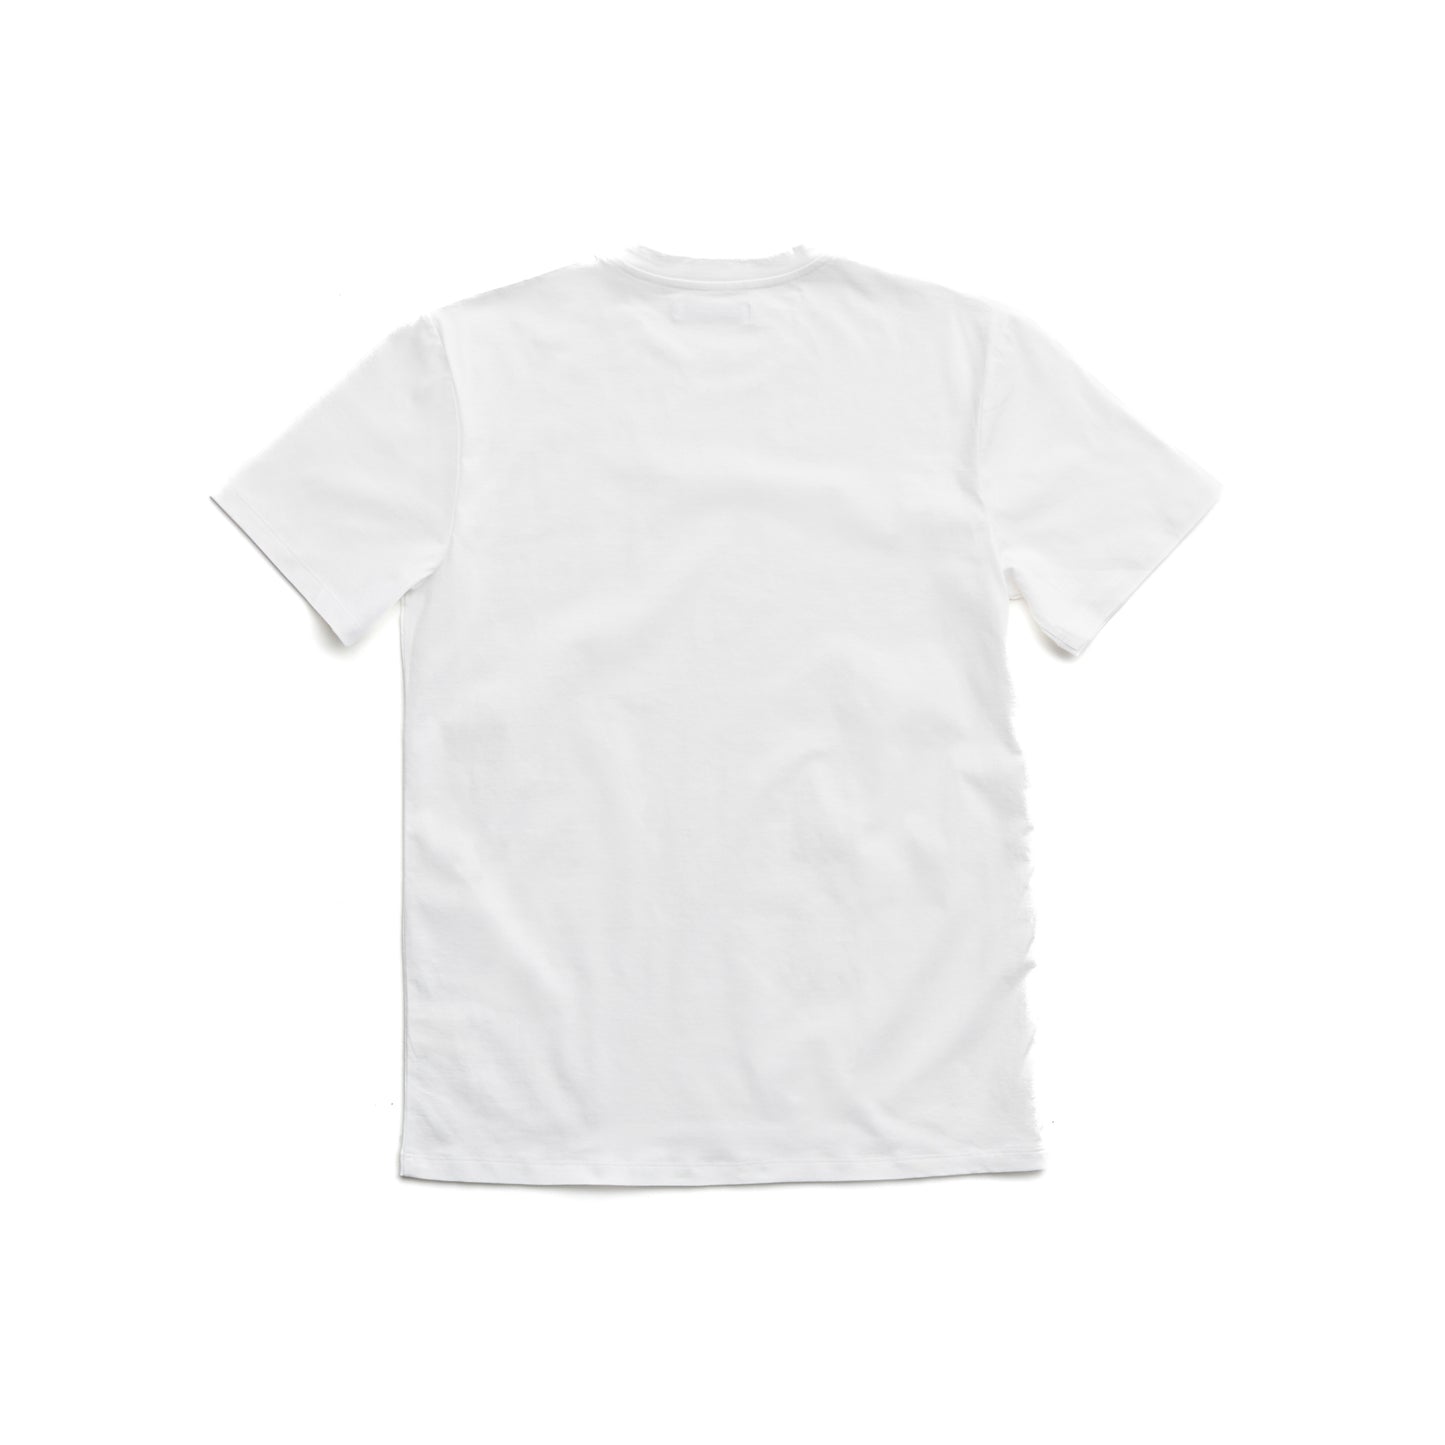 Ludde T-shirt in White